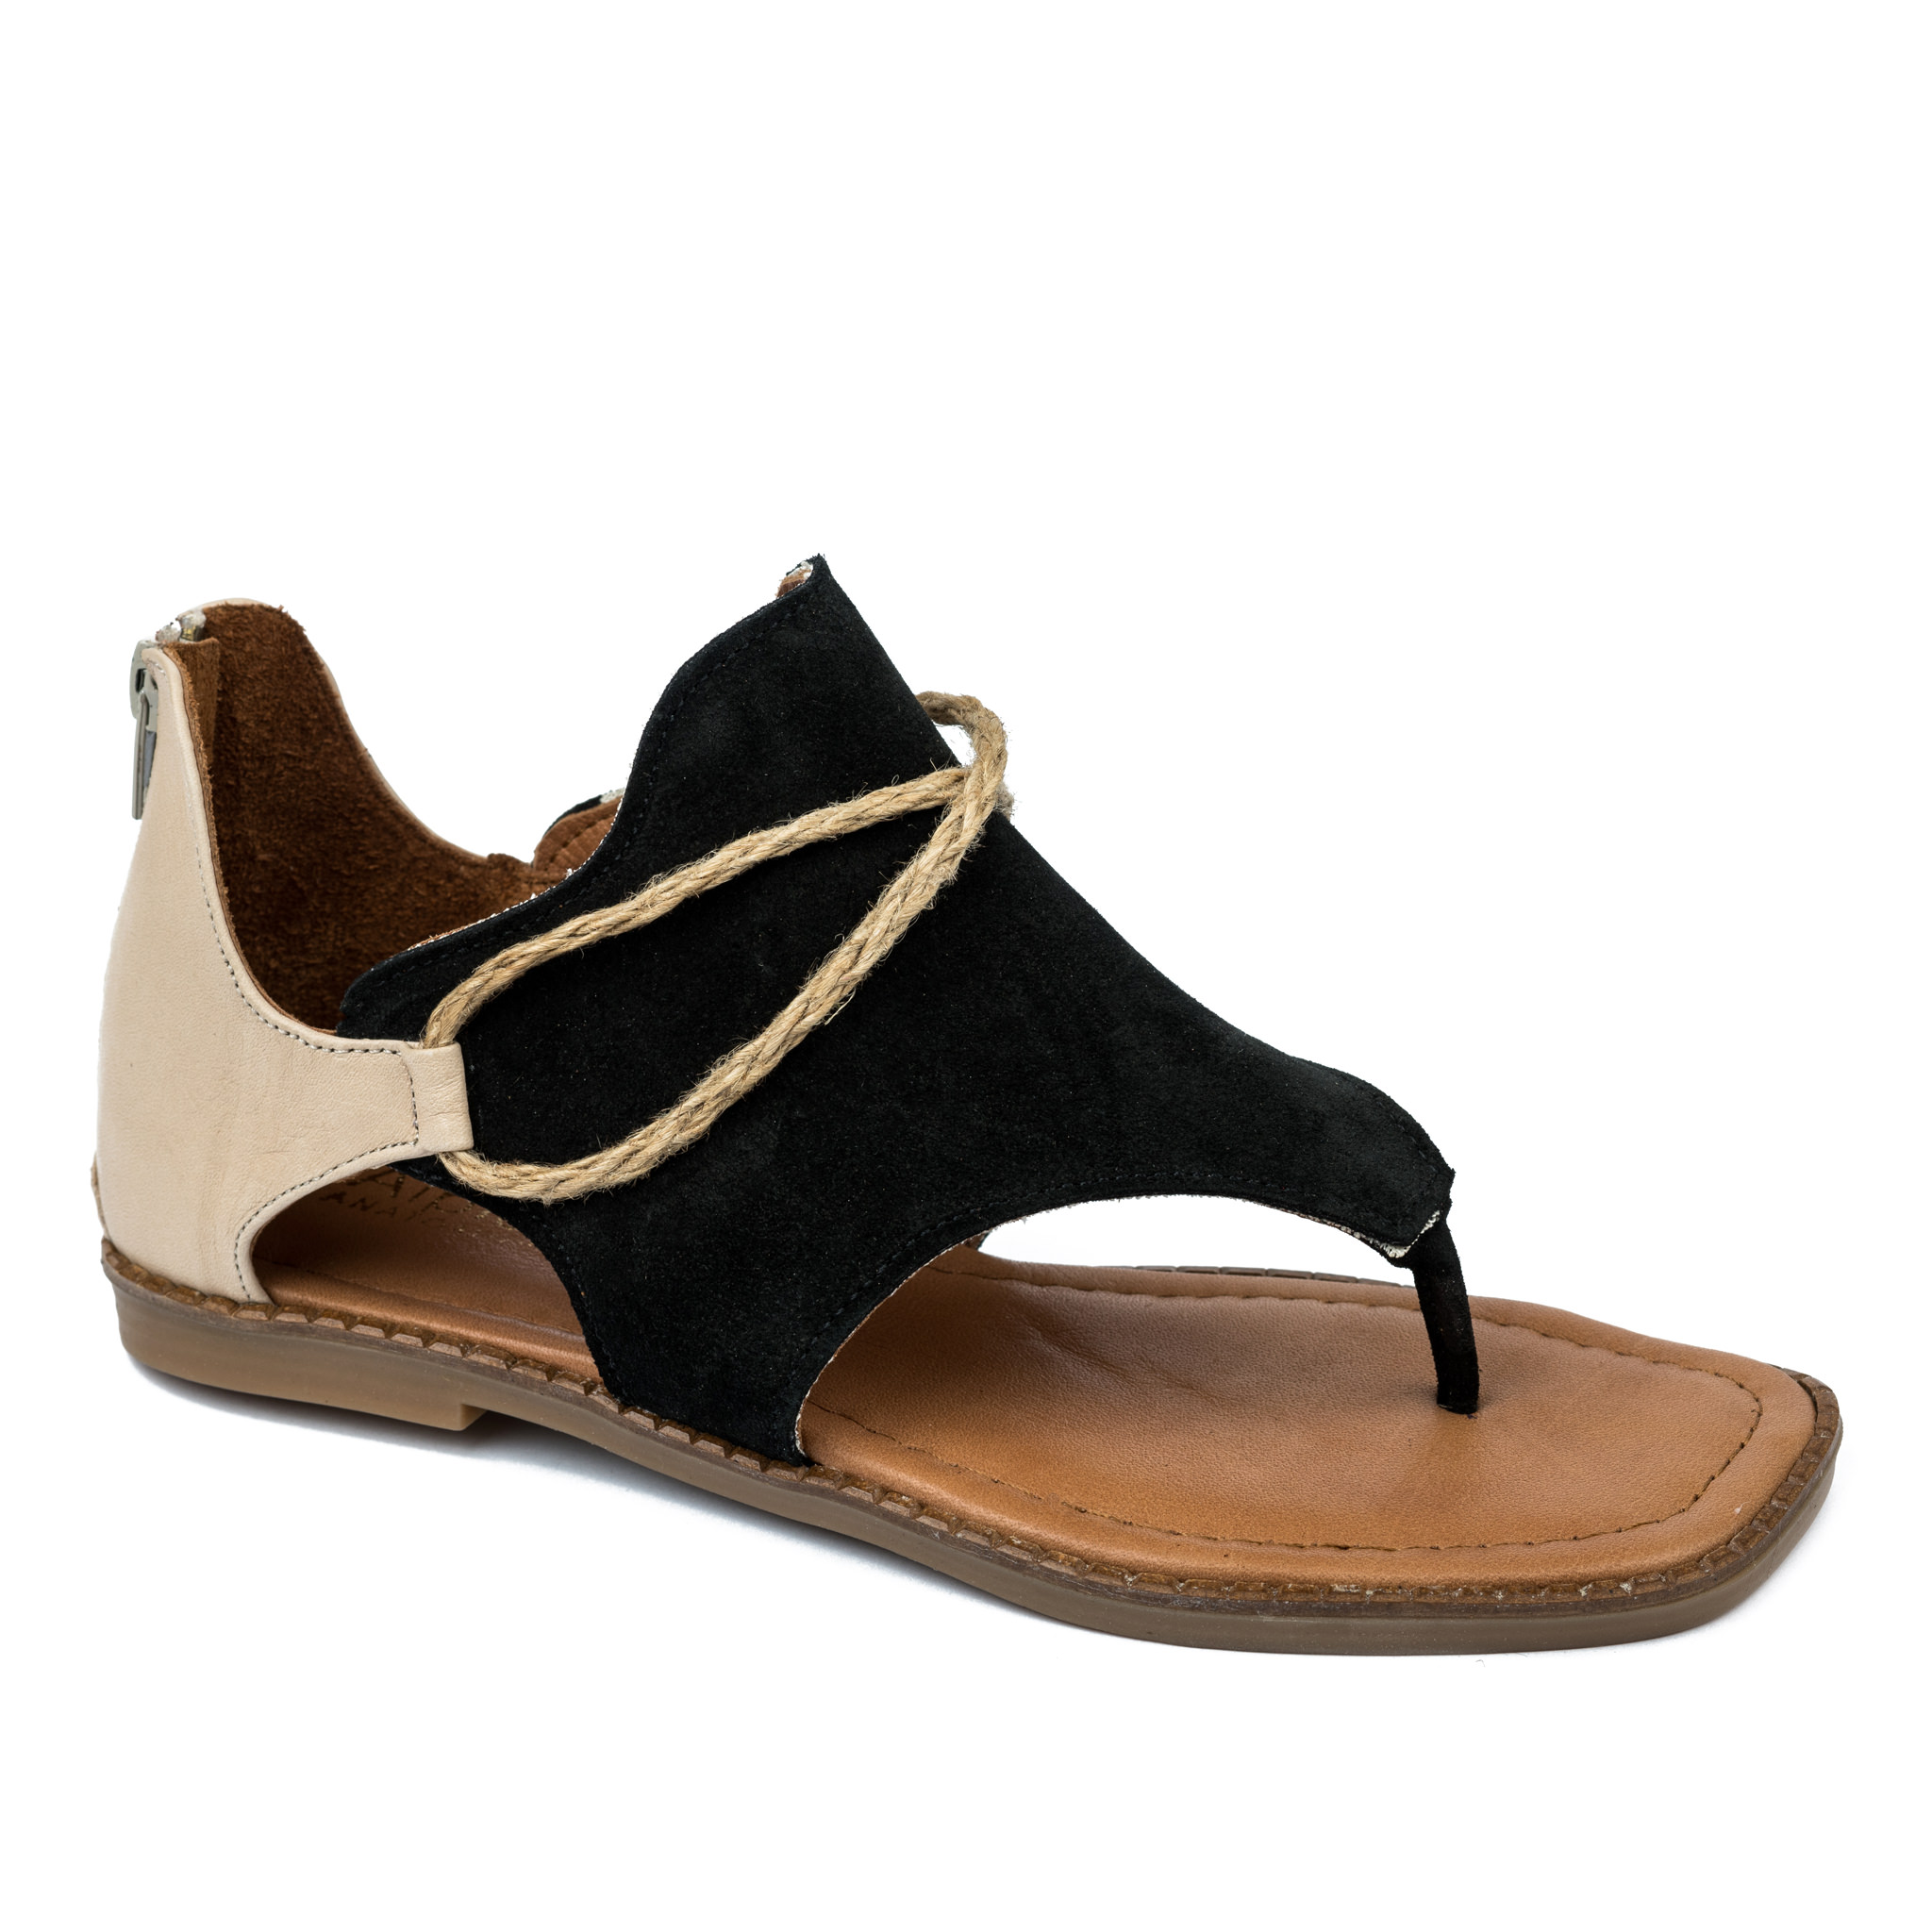 Leather sandals A643 - BLACK